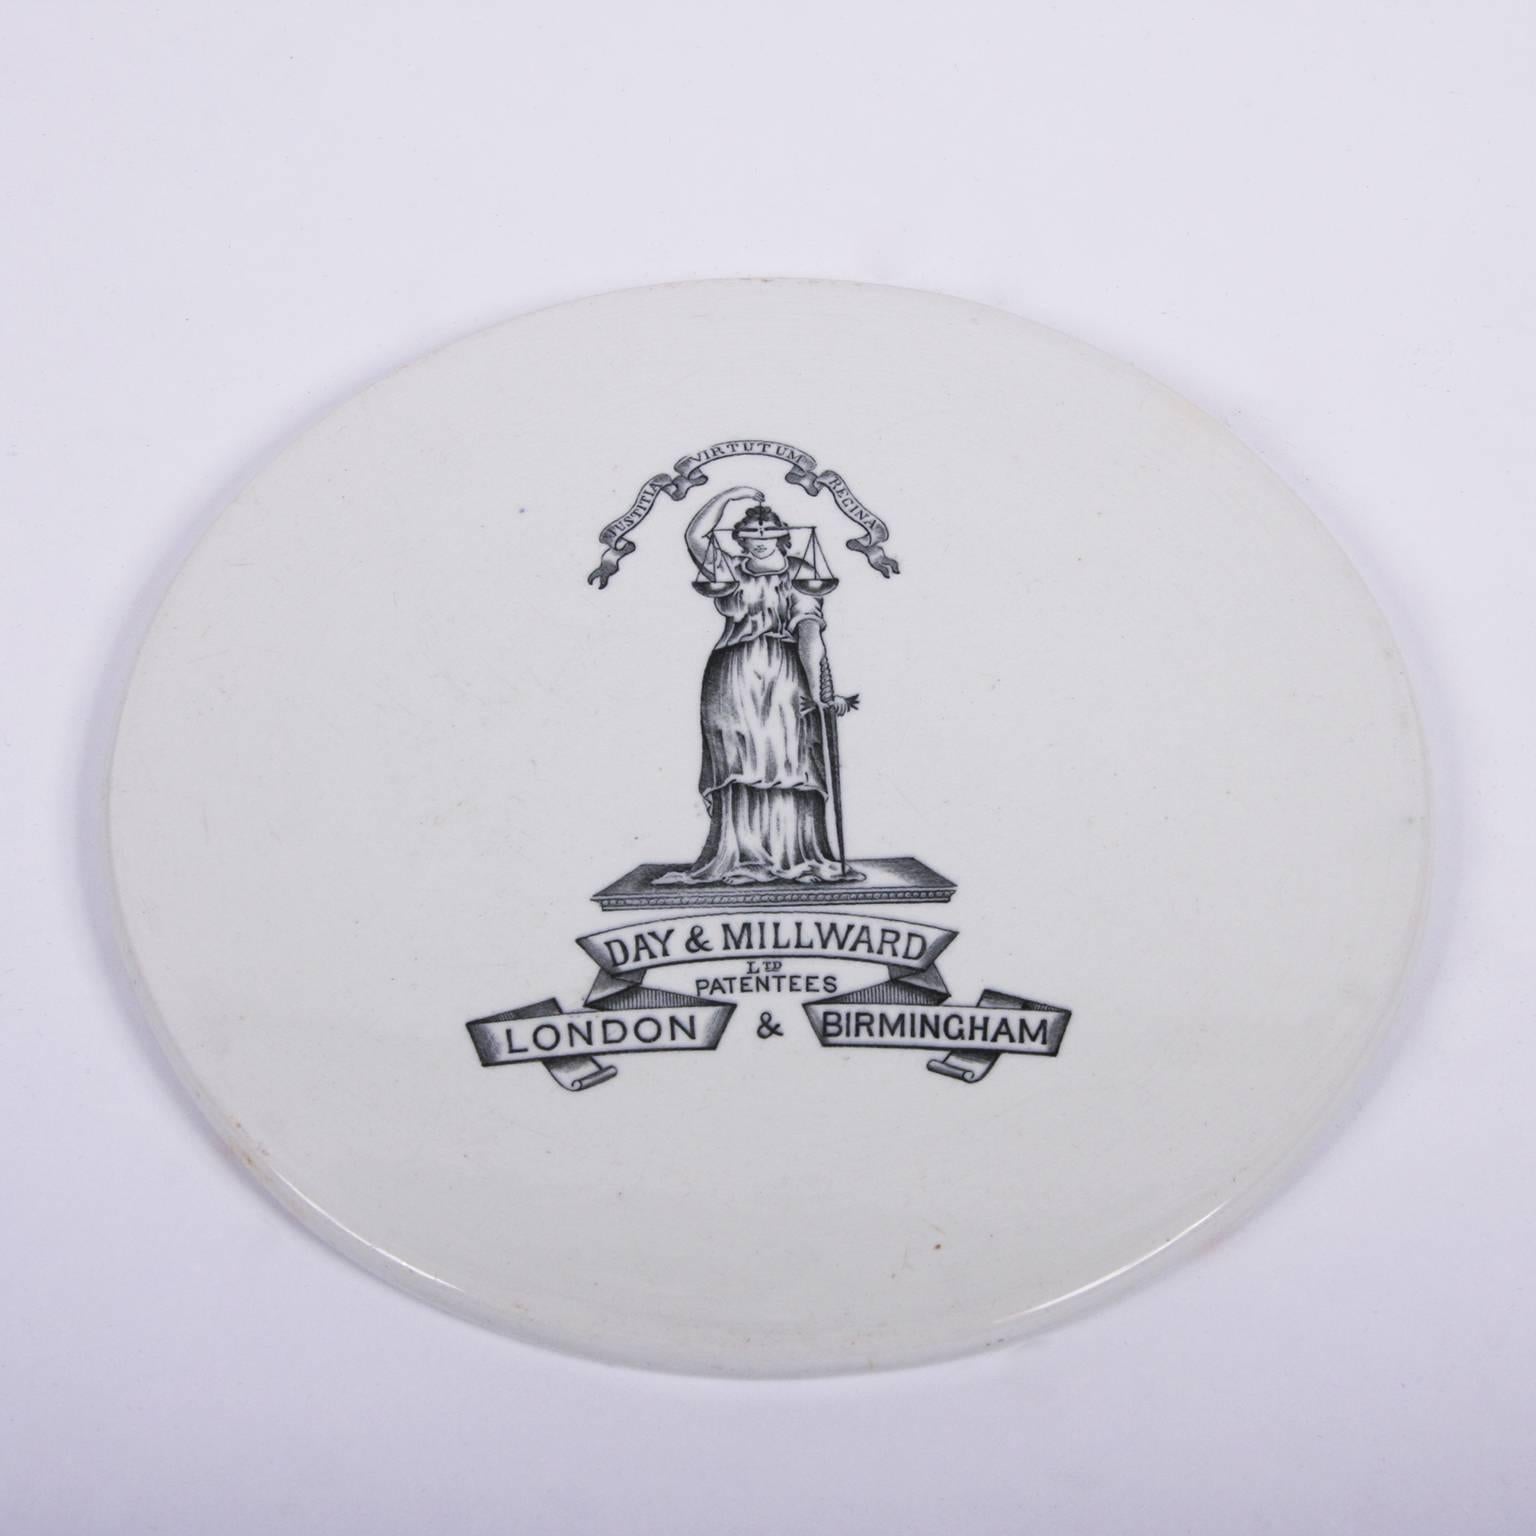 English, 19th century

A fantastic porcelain dairy scale plate, produced by Day & Millward, London & Birmingham. The text is housed in a banner ribbon and the image depicts lady justice with scales. This scale plate is in great condition and makes